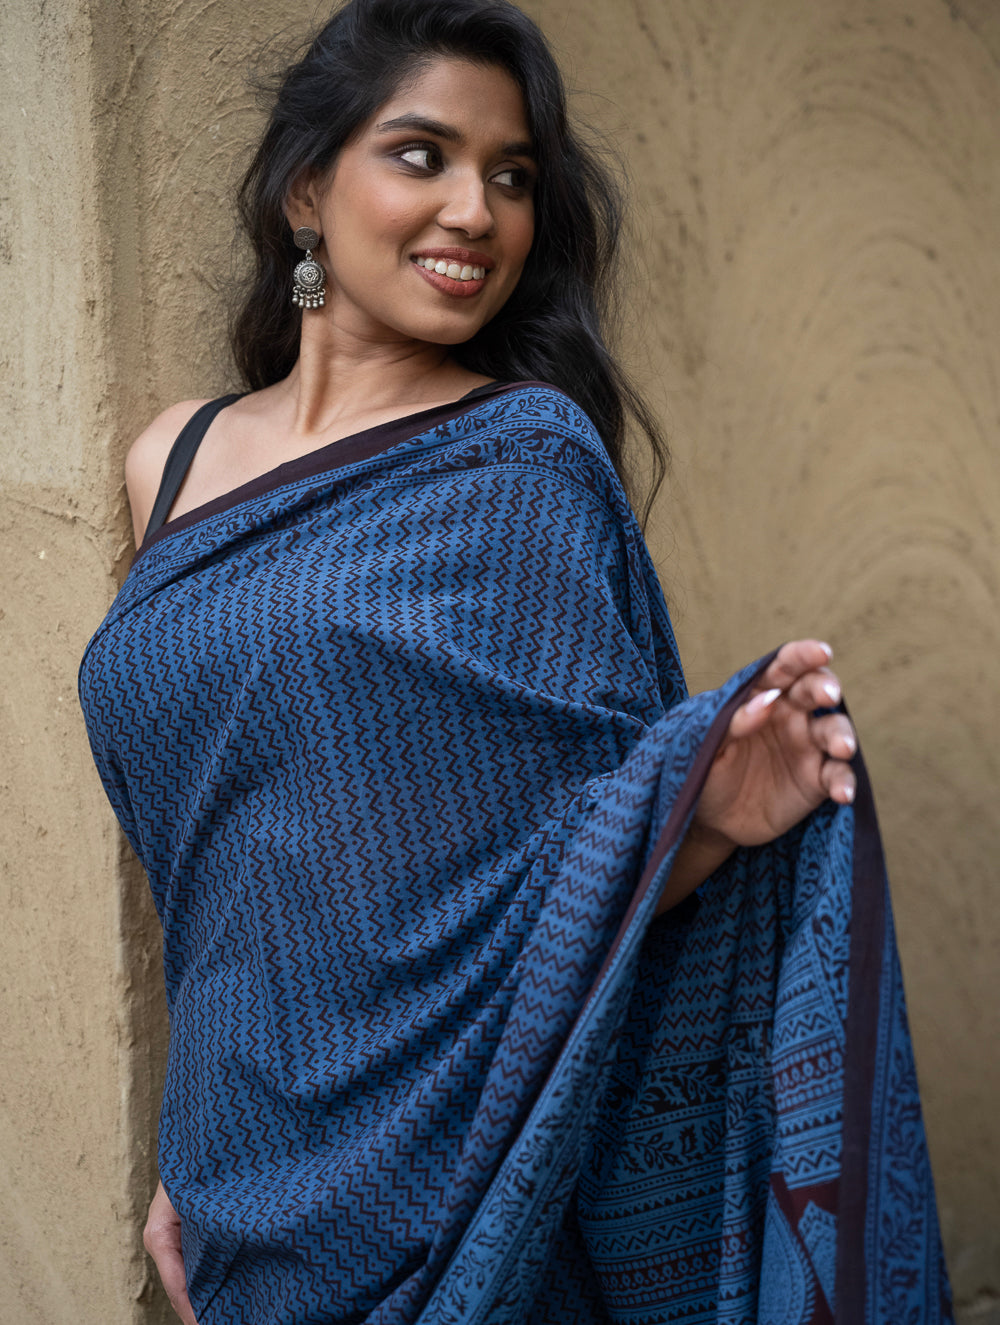 Load image into Gallery viewer, Exclusive Bagh Hand Block Printed Cotton Saree - Blue ZigZags